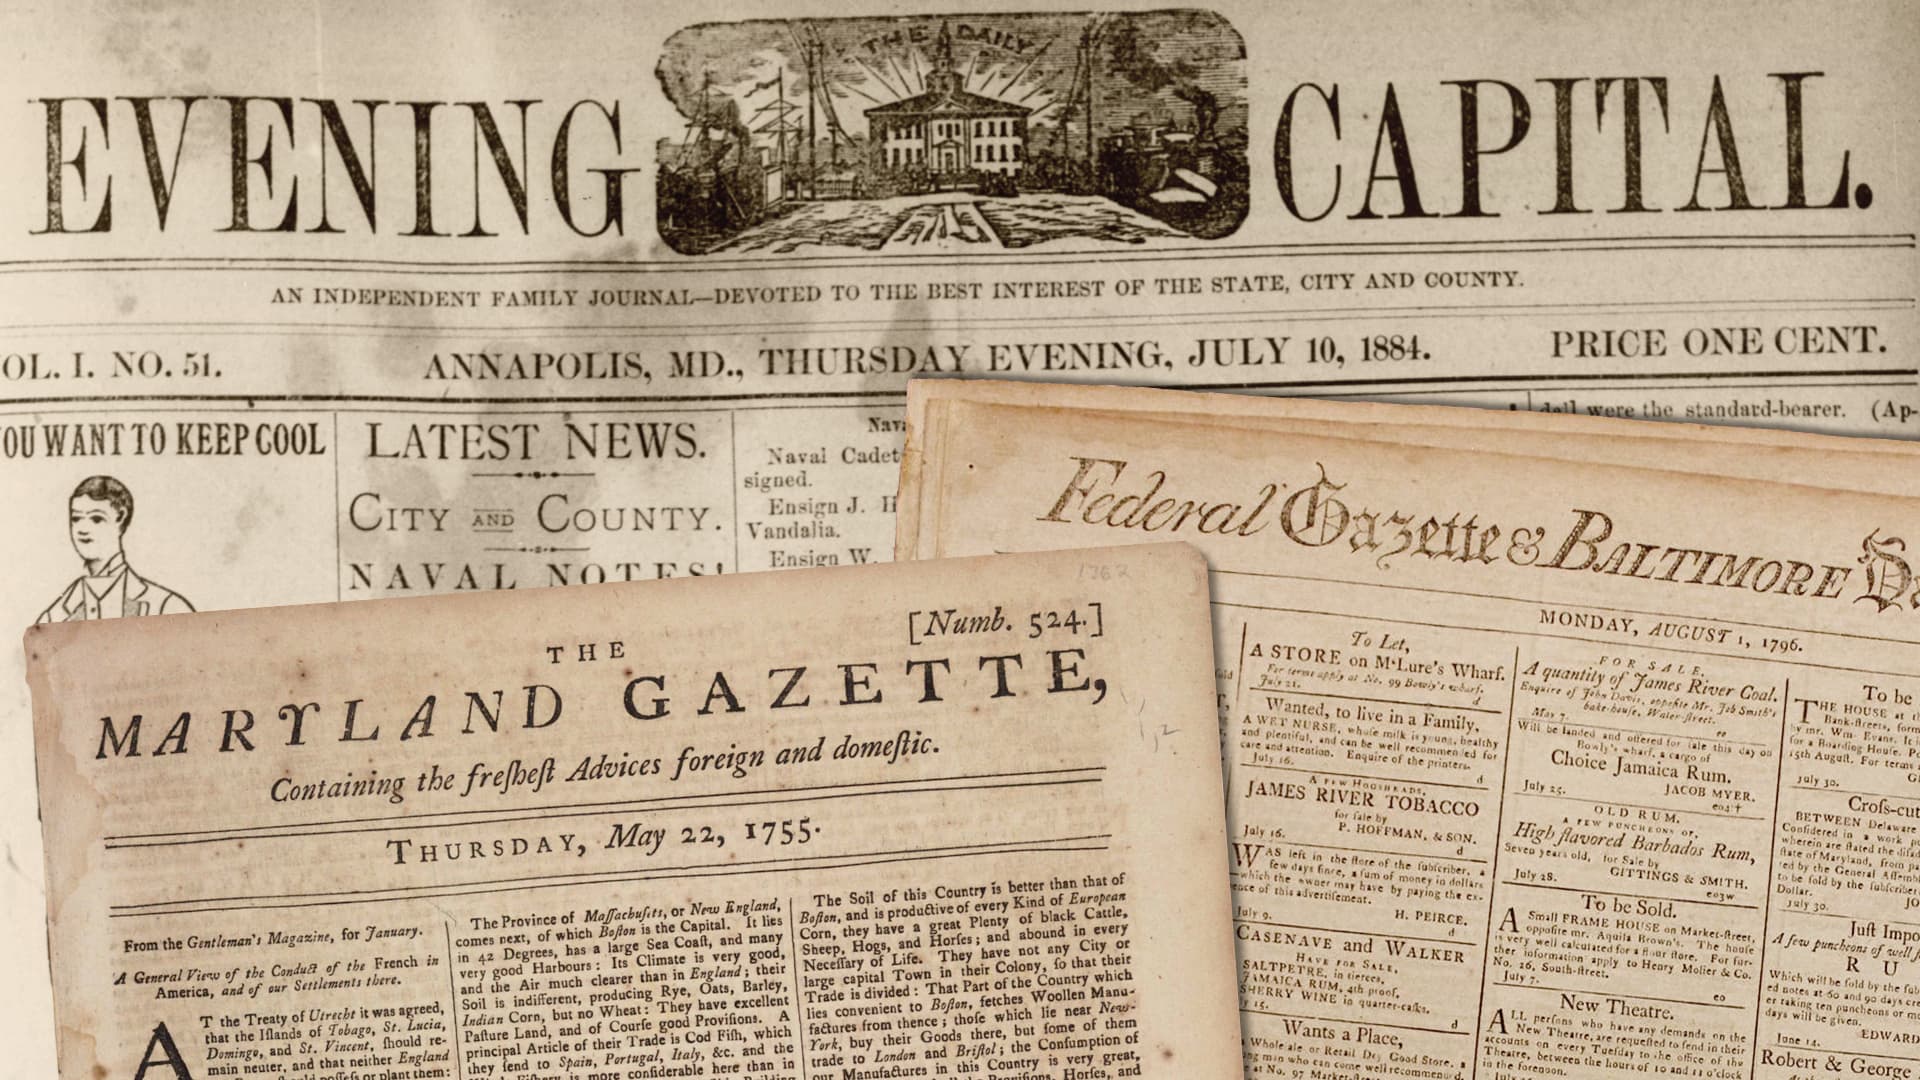 Covers of old newspapers: The Maryland Gazette, The Evening Capital and the Federal Gazette and Baltimore Daily Advertiser